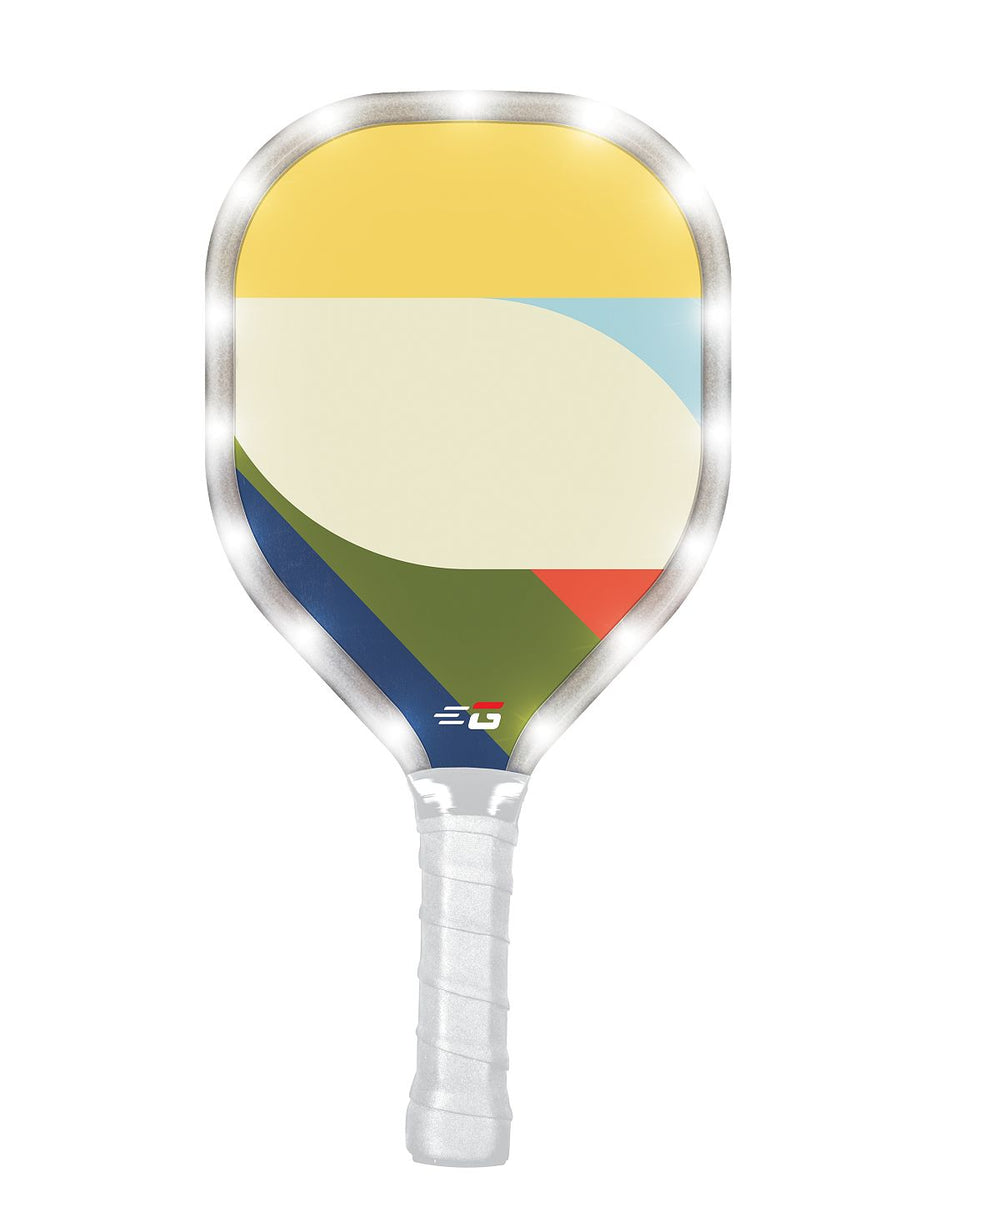 Colorful LED Pickleball Set - 4 Piece, Durable Wooden Paddles, Light-Up Balls, Exclusive to Toys'R'Us